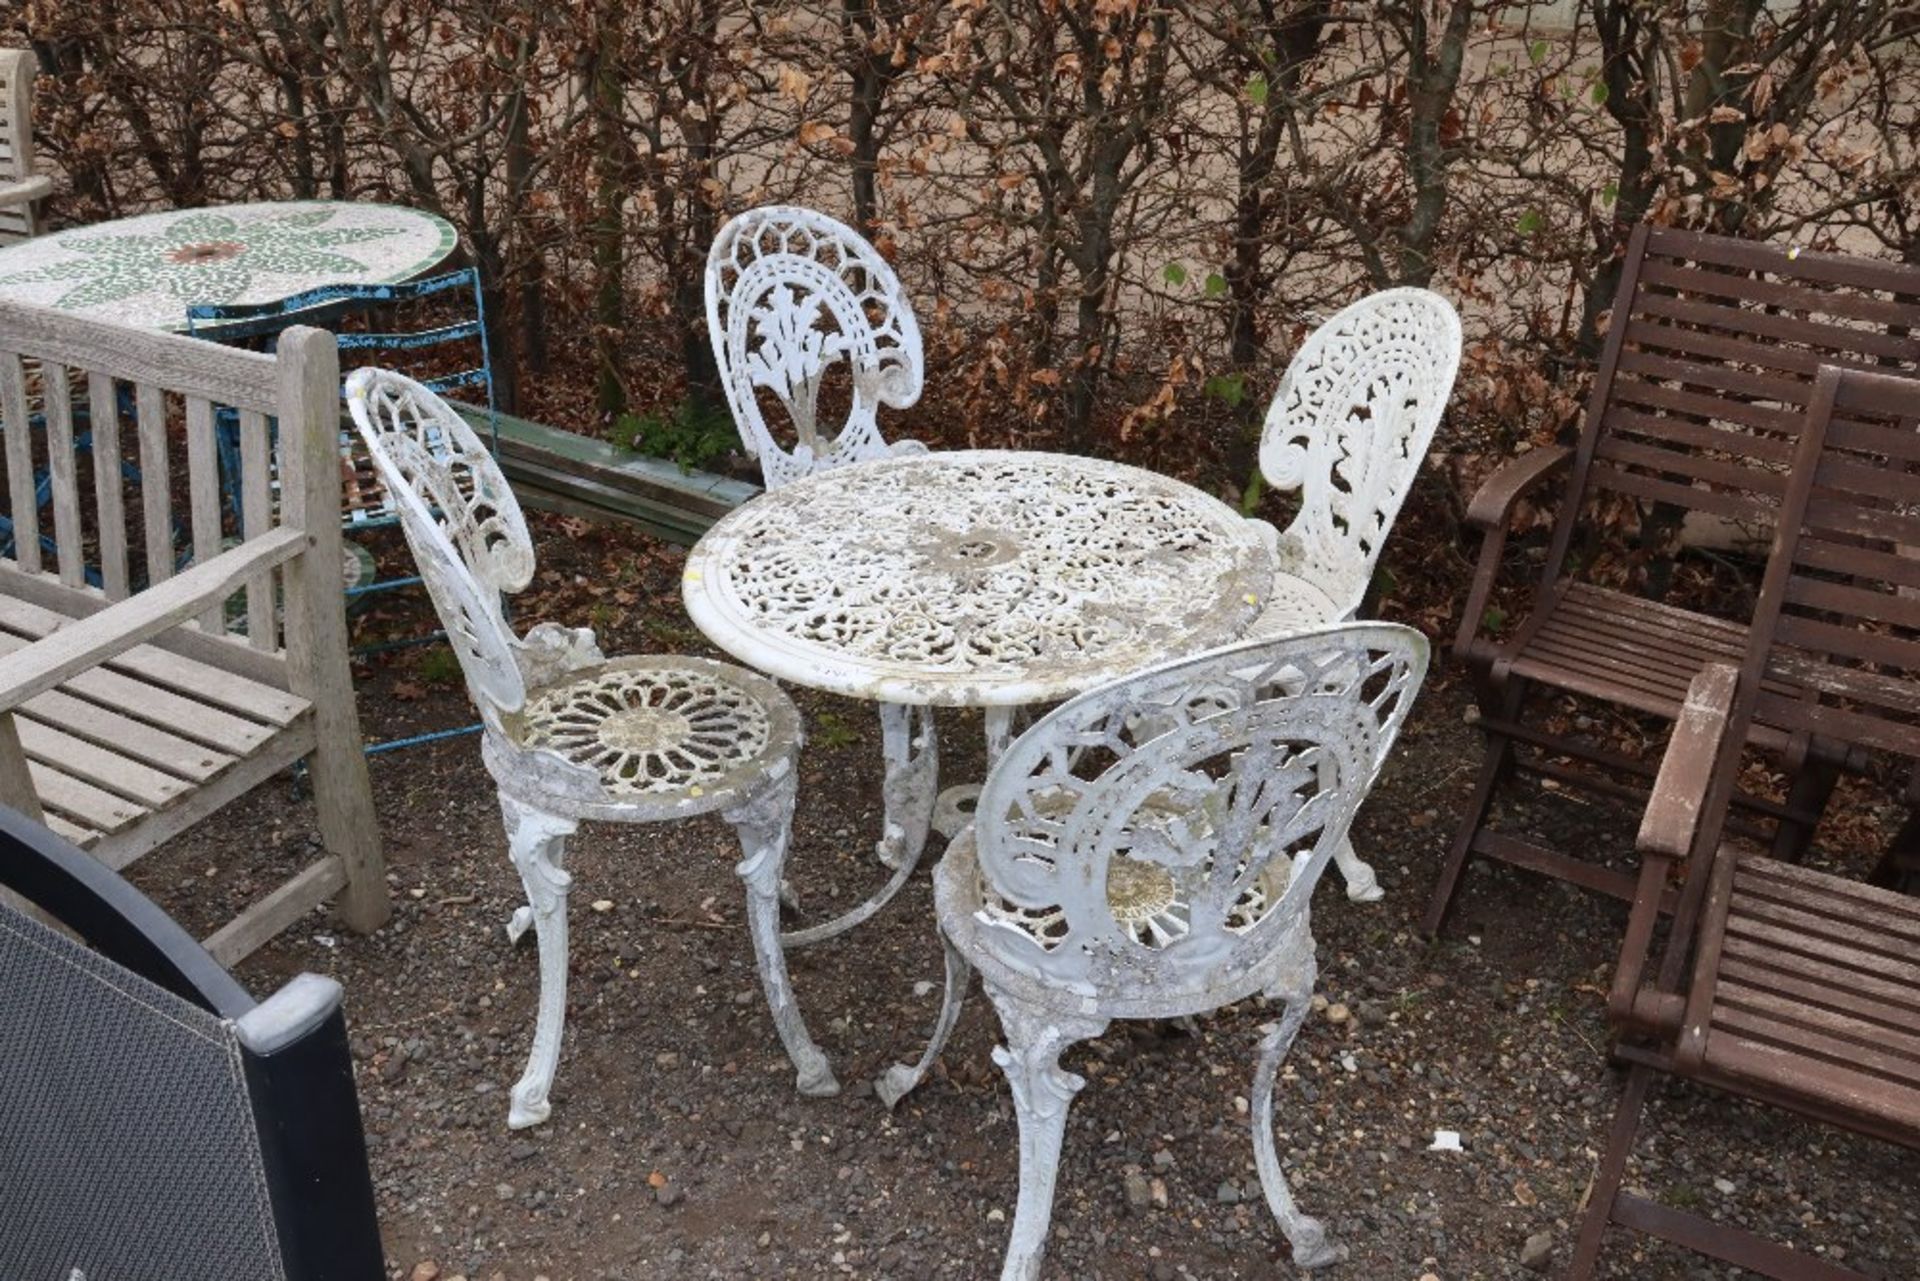 A white painted aluminium ornate table and set of